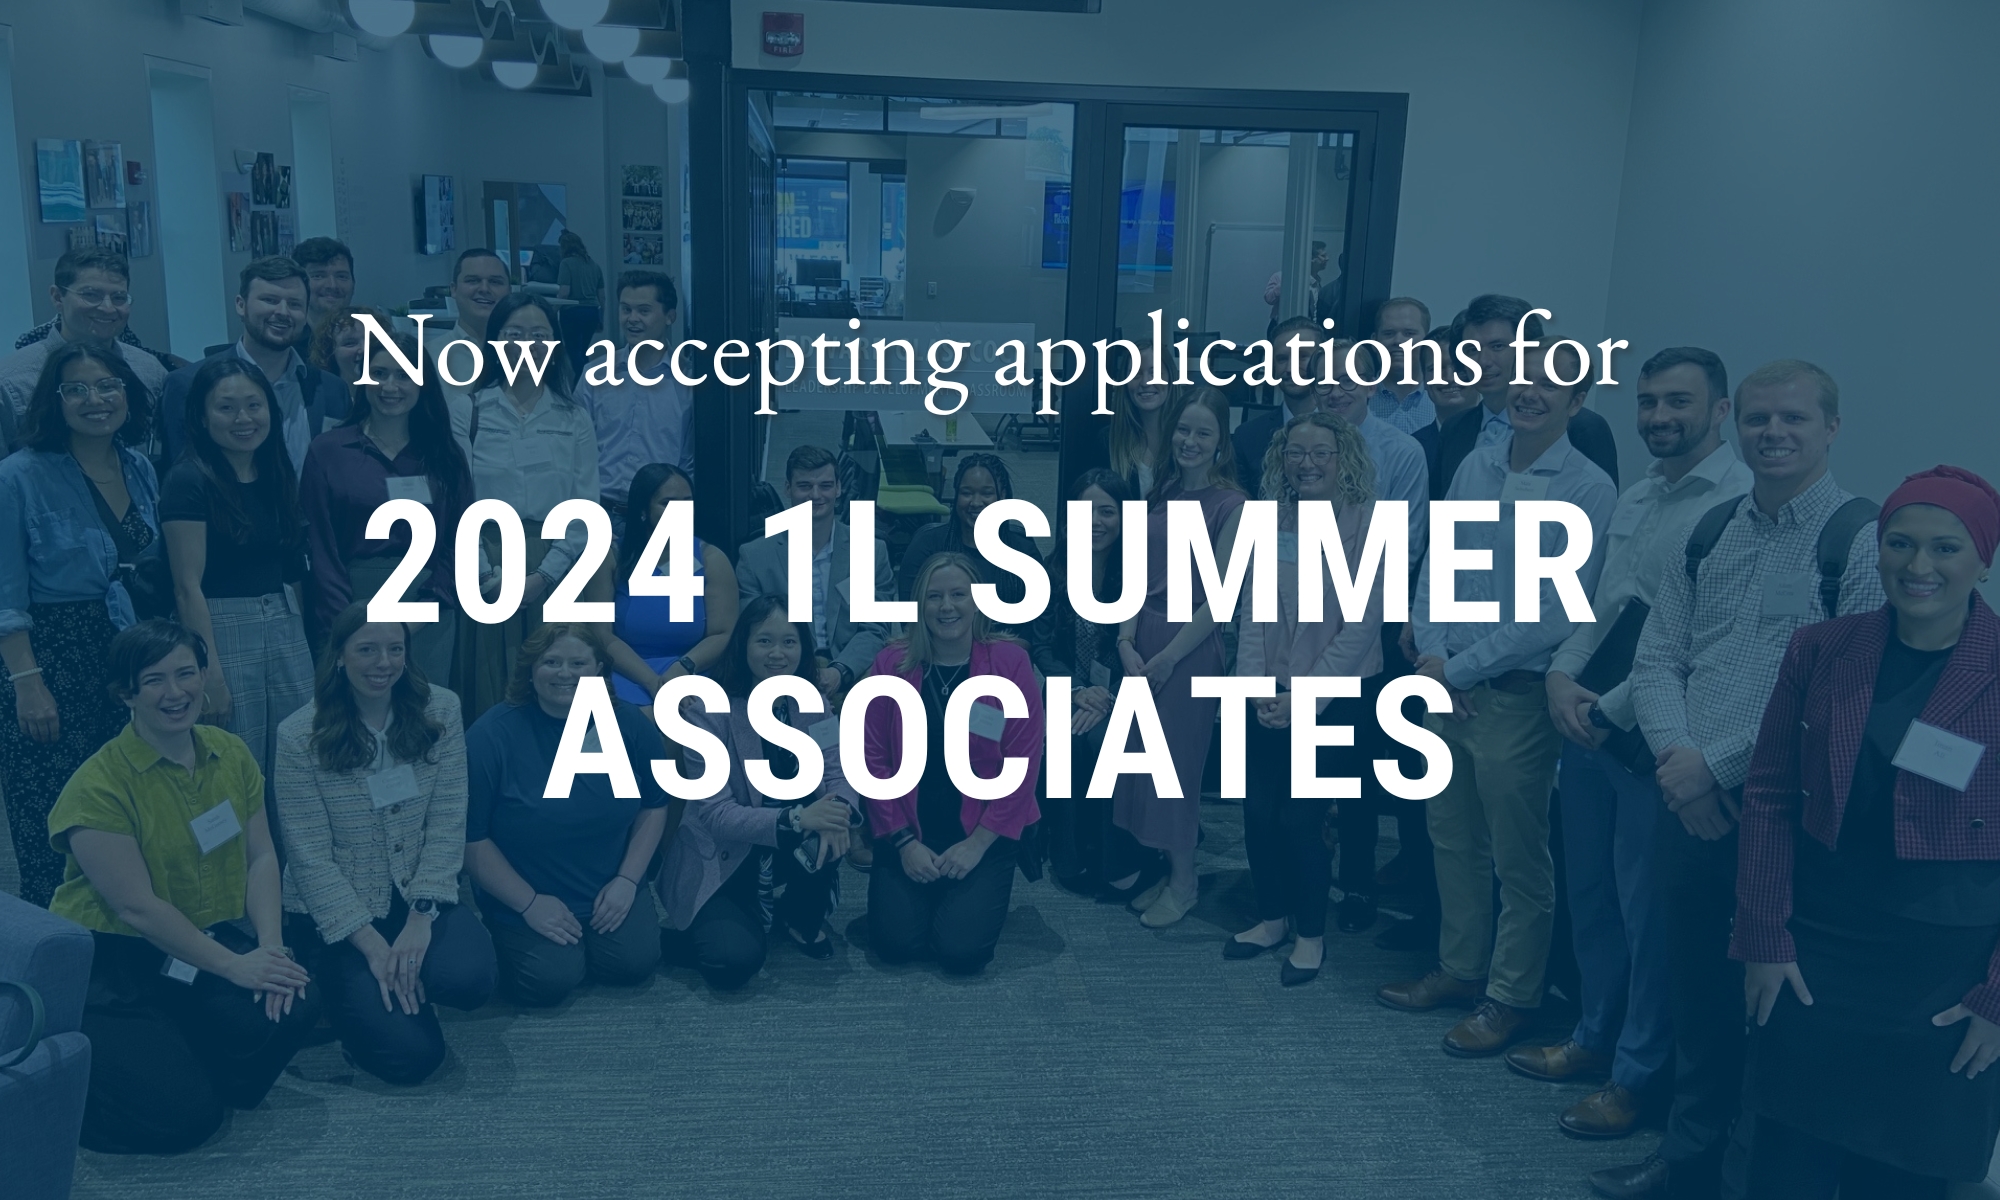 Now accepting applications for 2024 1L Summer Associates